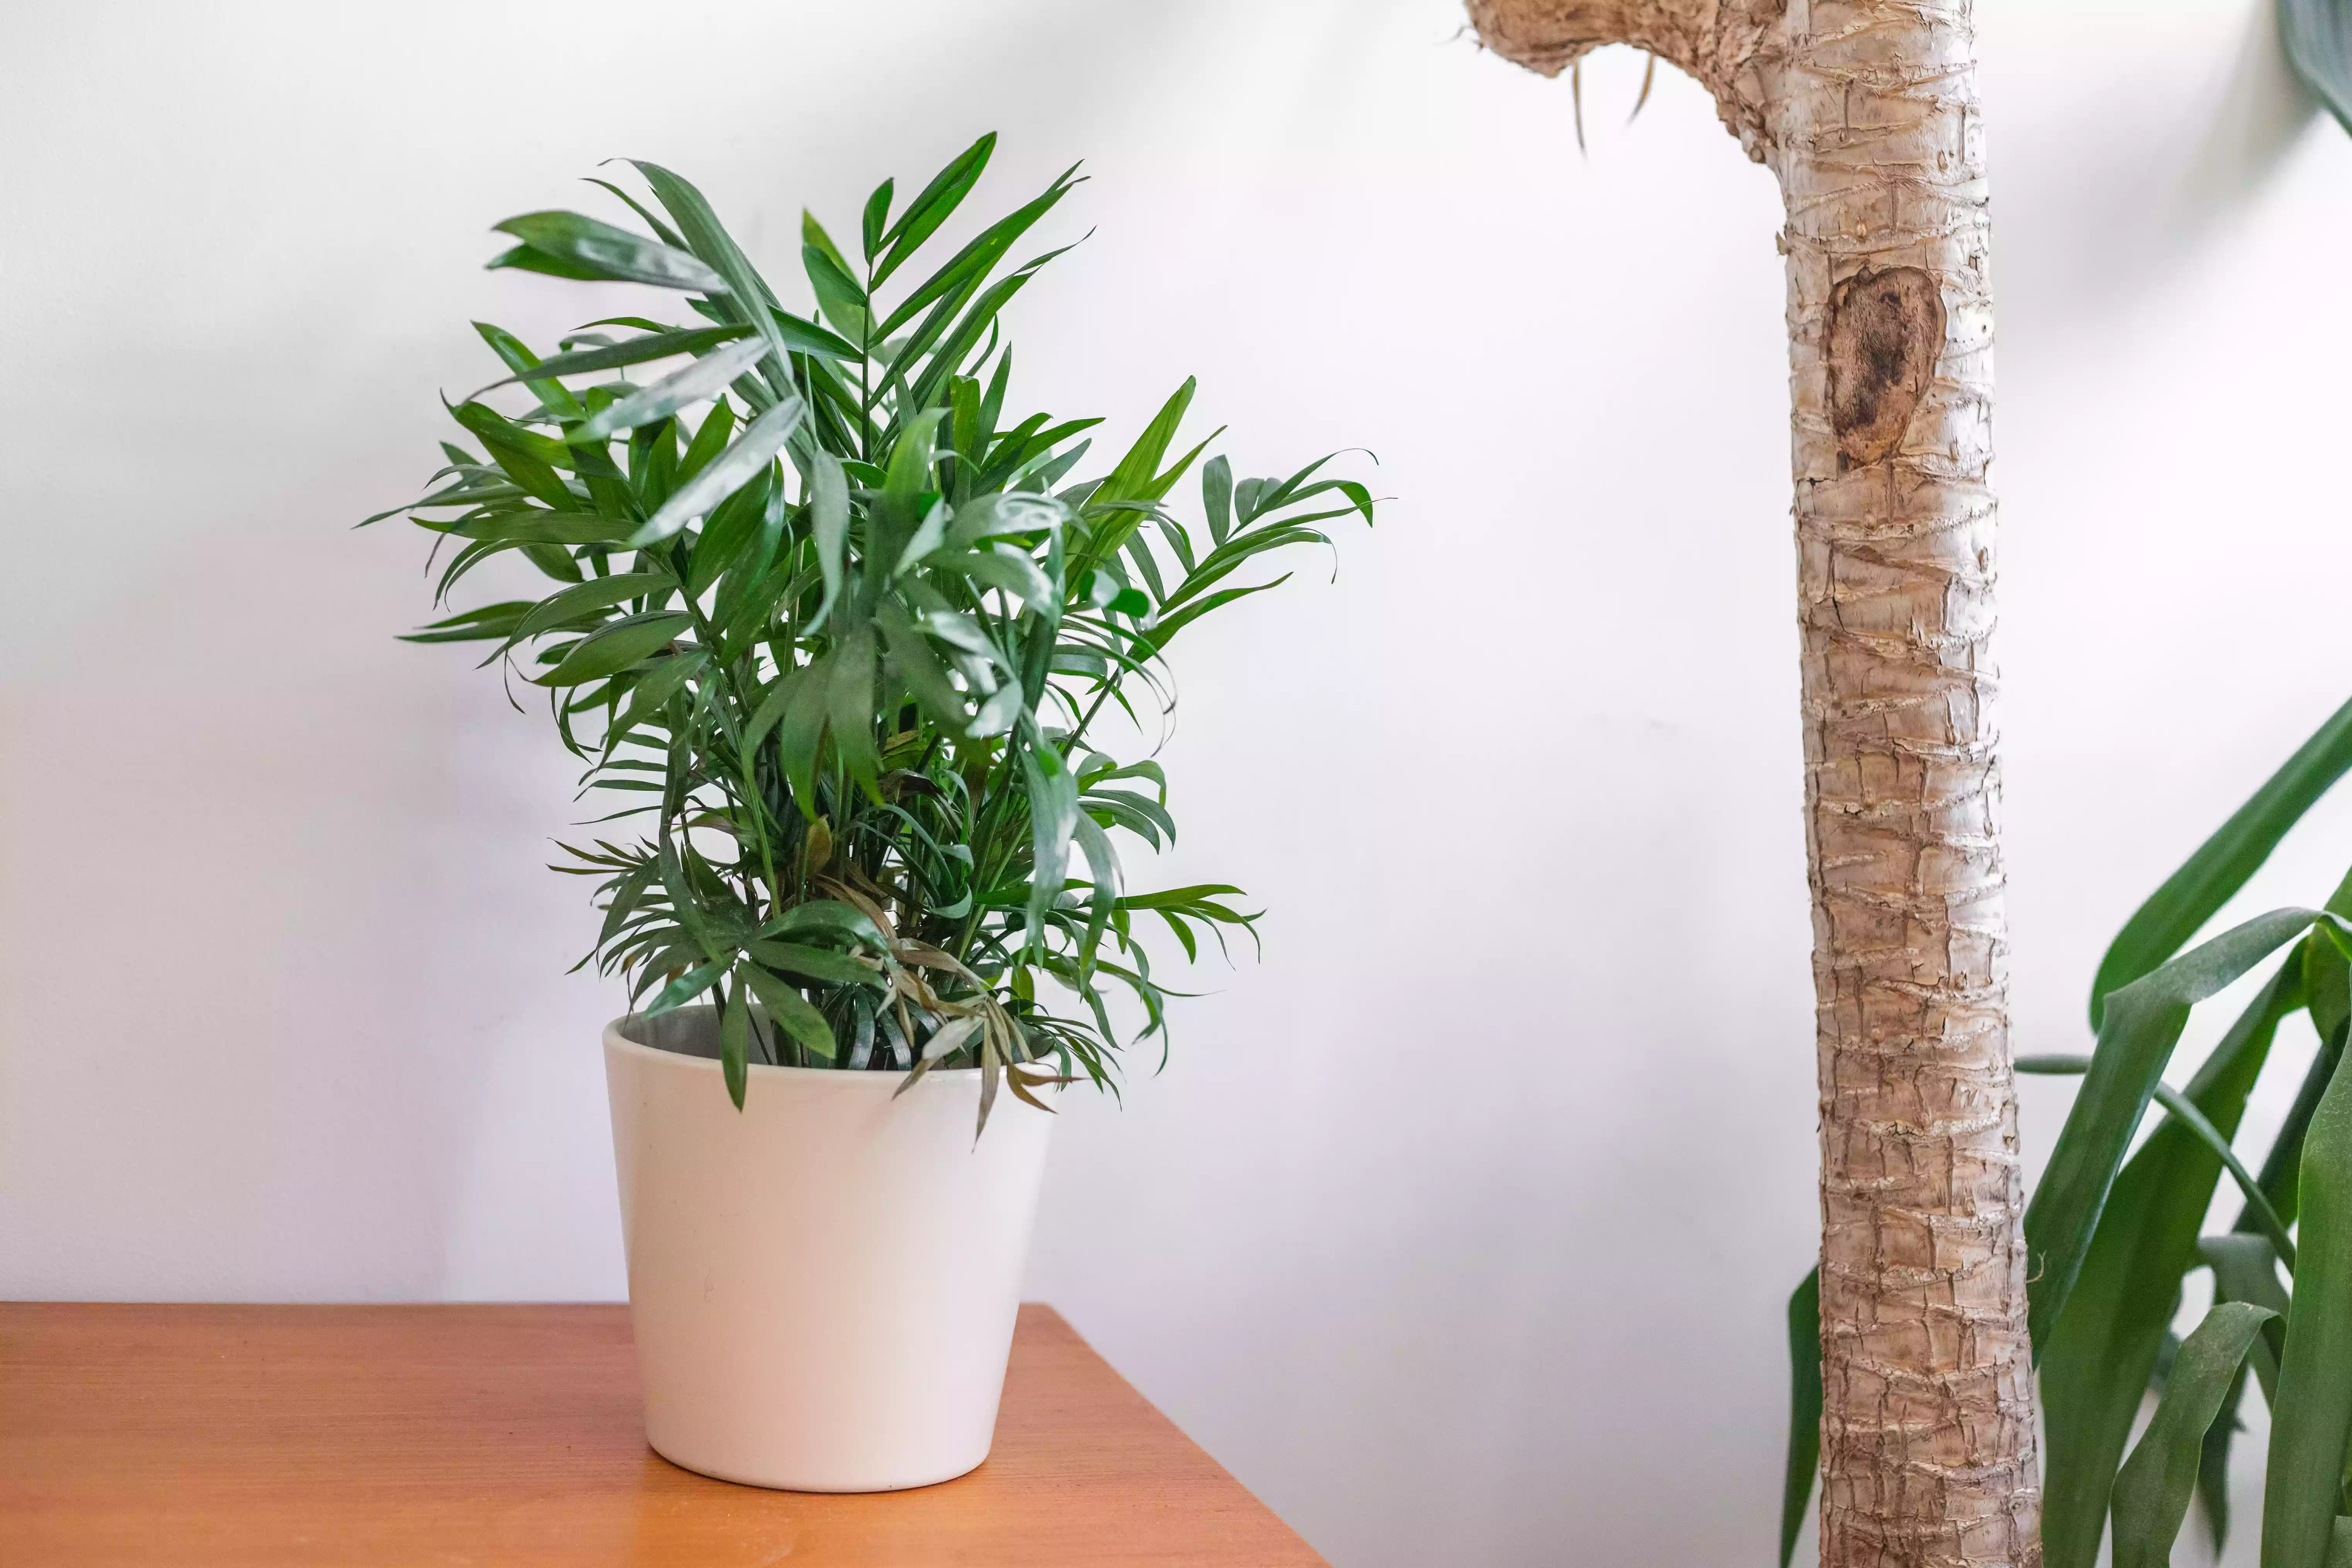 parlor palm house plant in white pot on wooden furniture next to other larger house plants